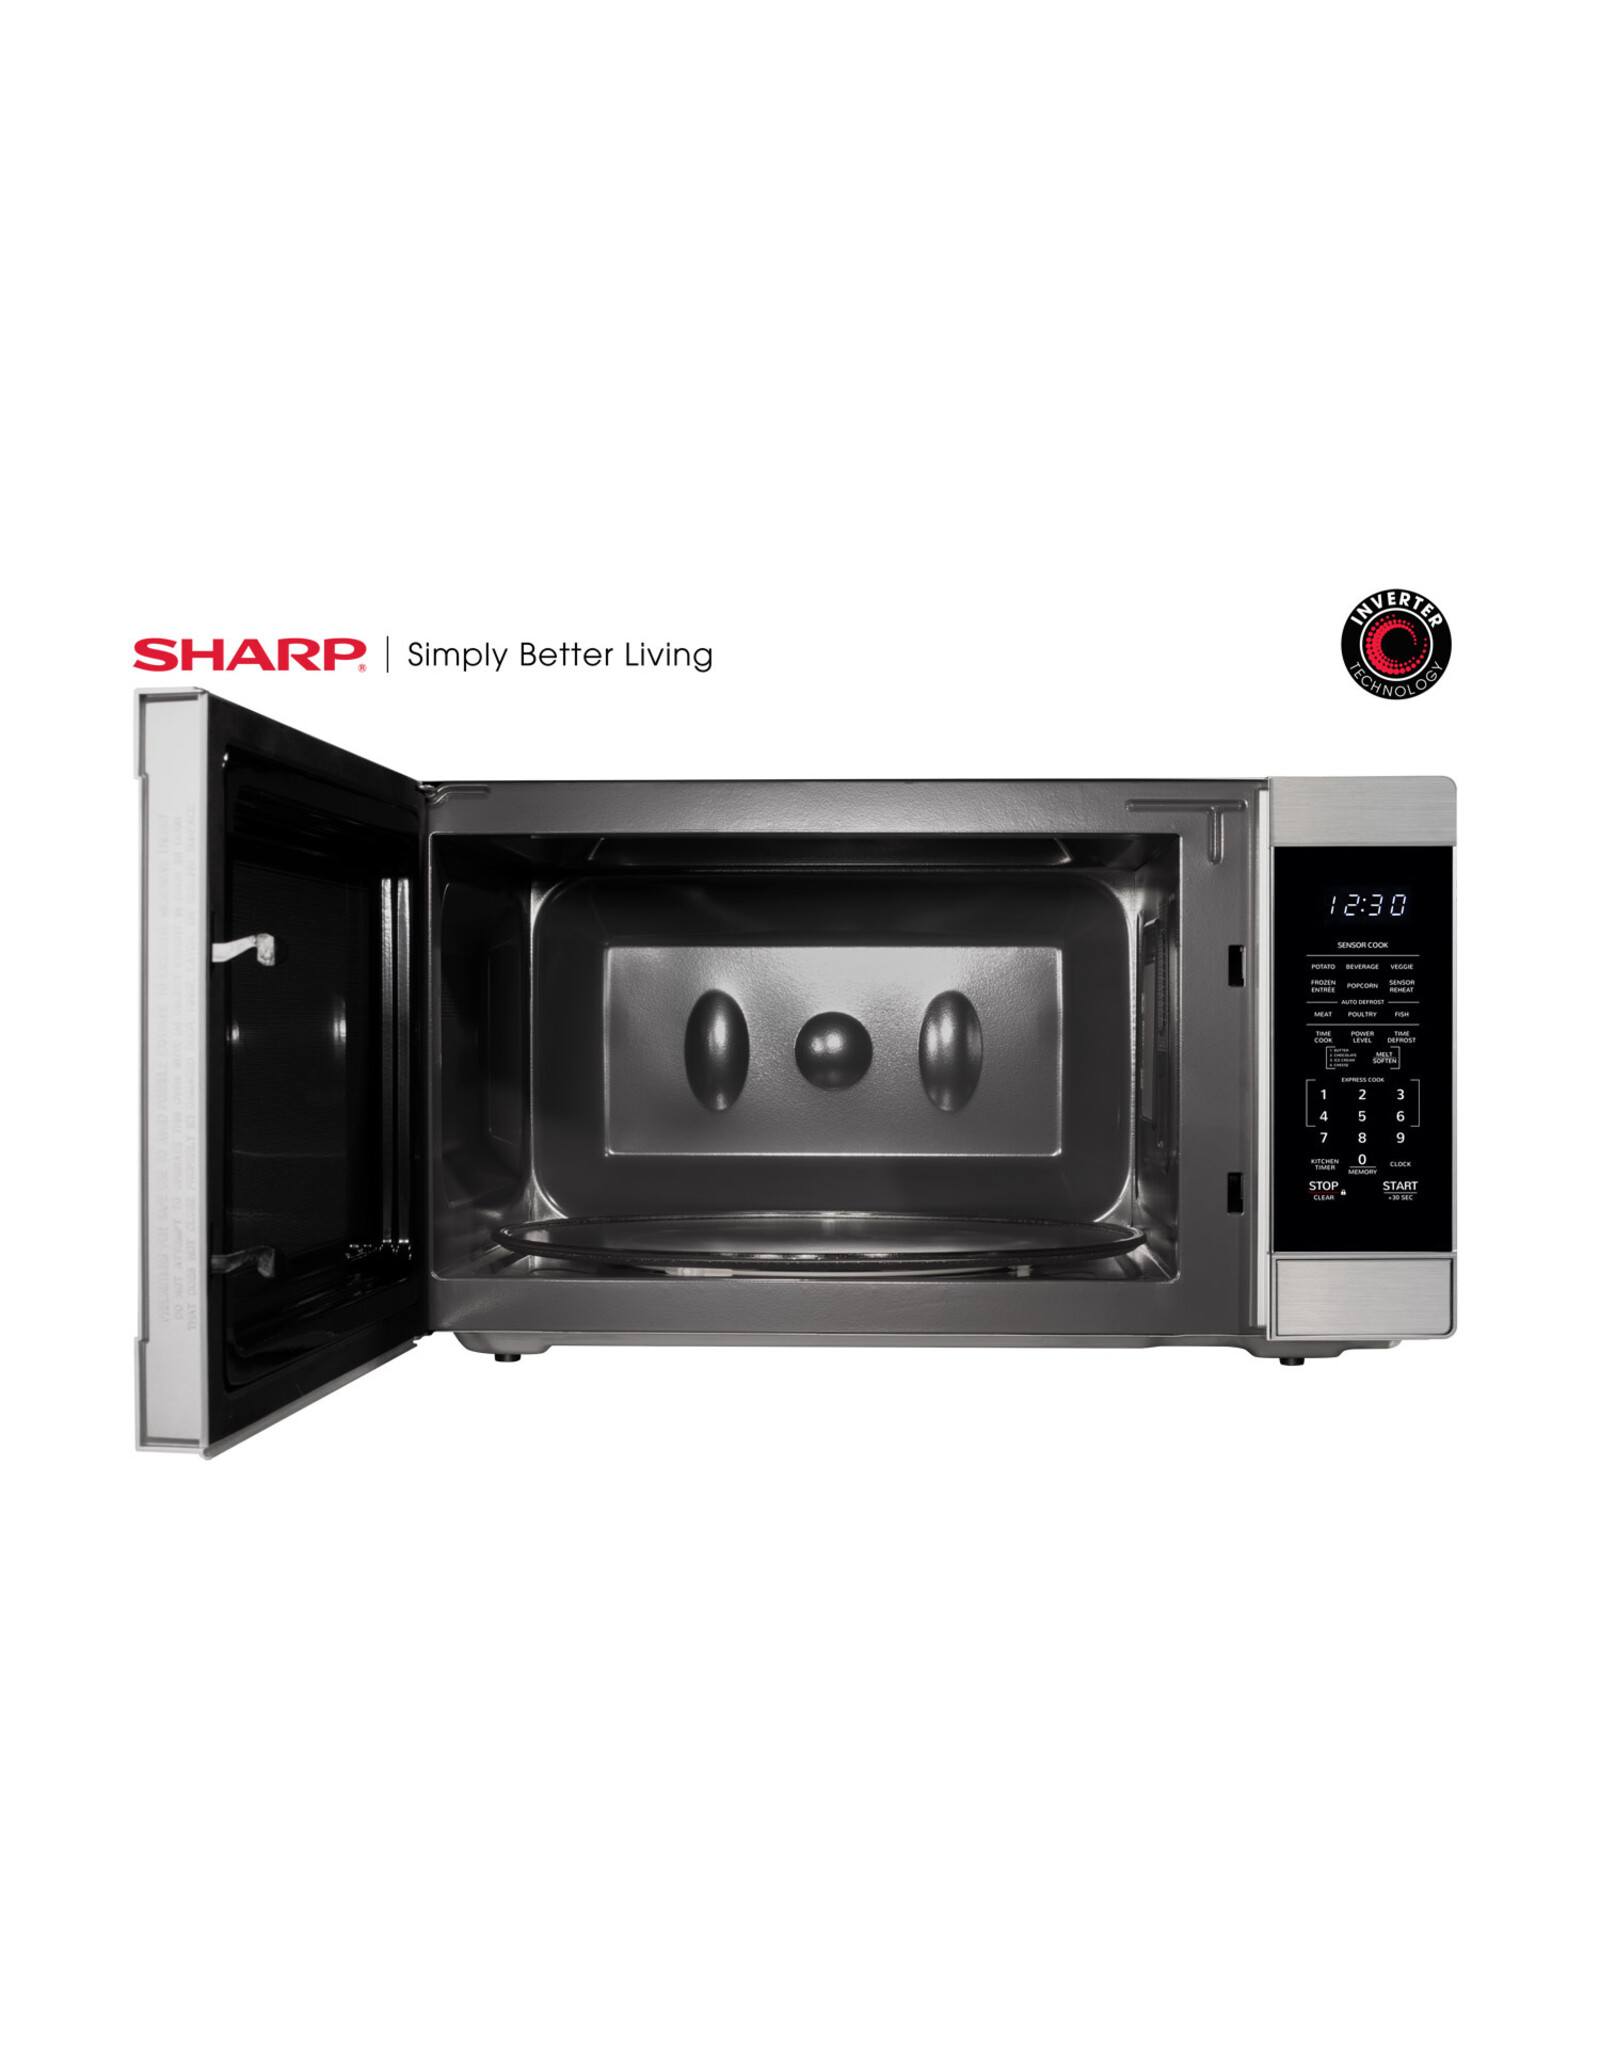 SMC2266HS Sharp 2.2-Cu. Ft. Countertop Microwave Oven with Inverter Technology in Stainless Steel